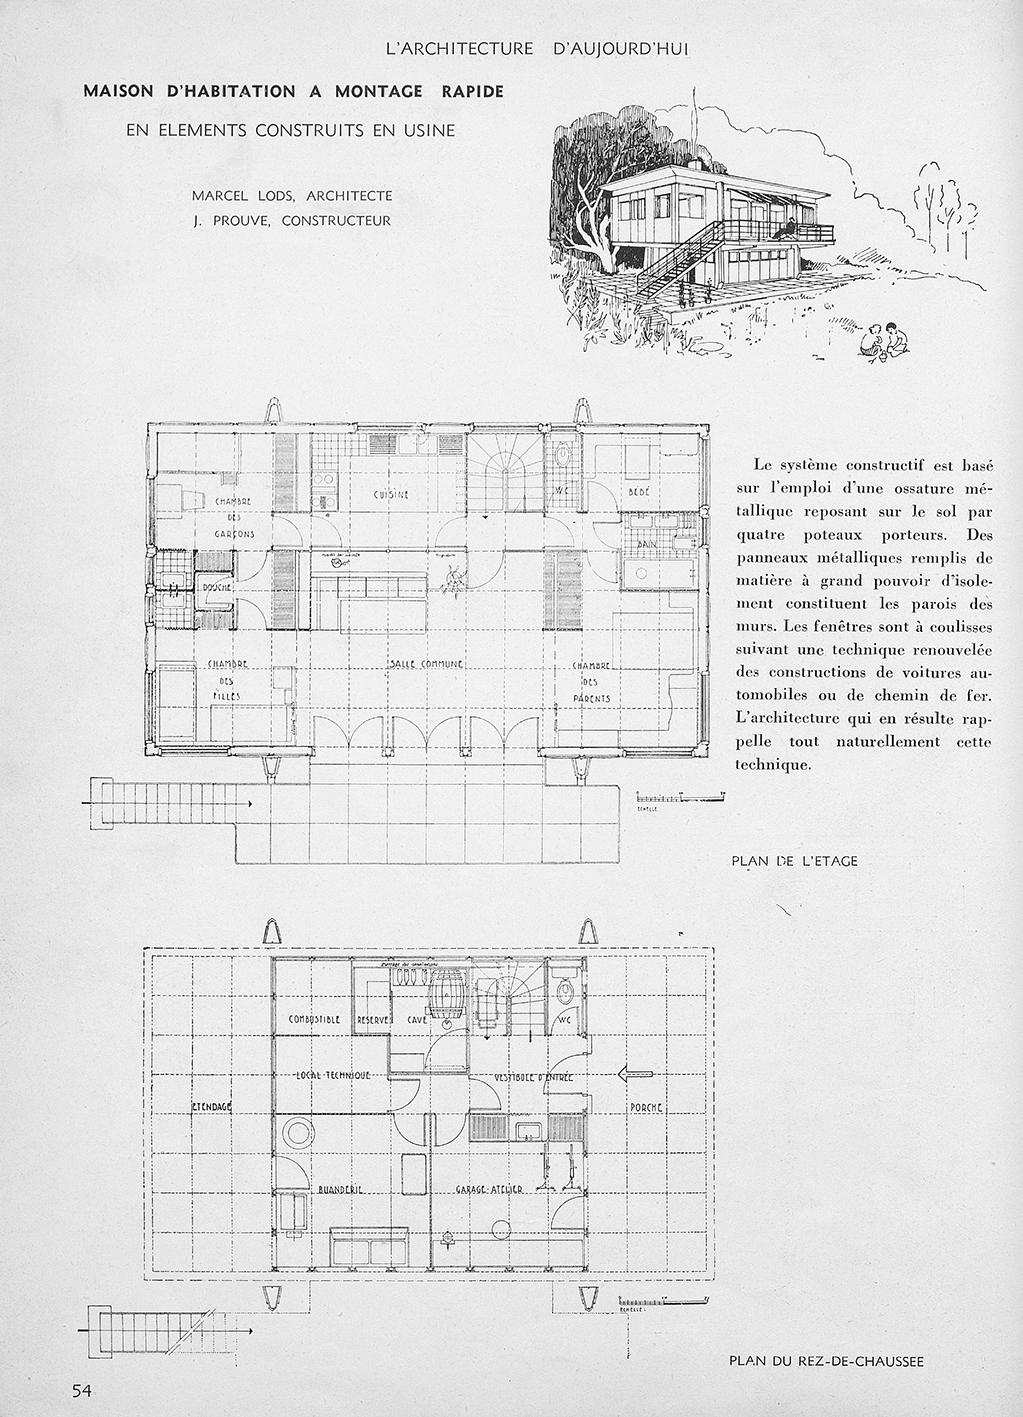 Quickly assembled house (Jean Prouvé with architect Marcel Lods) in <i>L’Architecture d’aujourd’hui,</i> no. 4, April 1946.